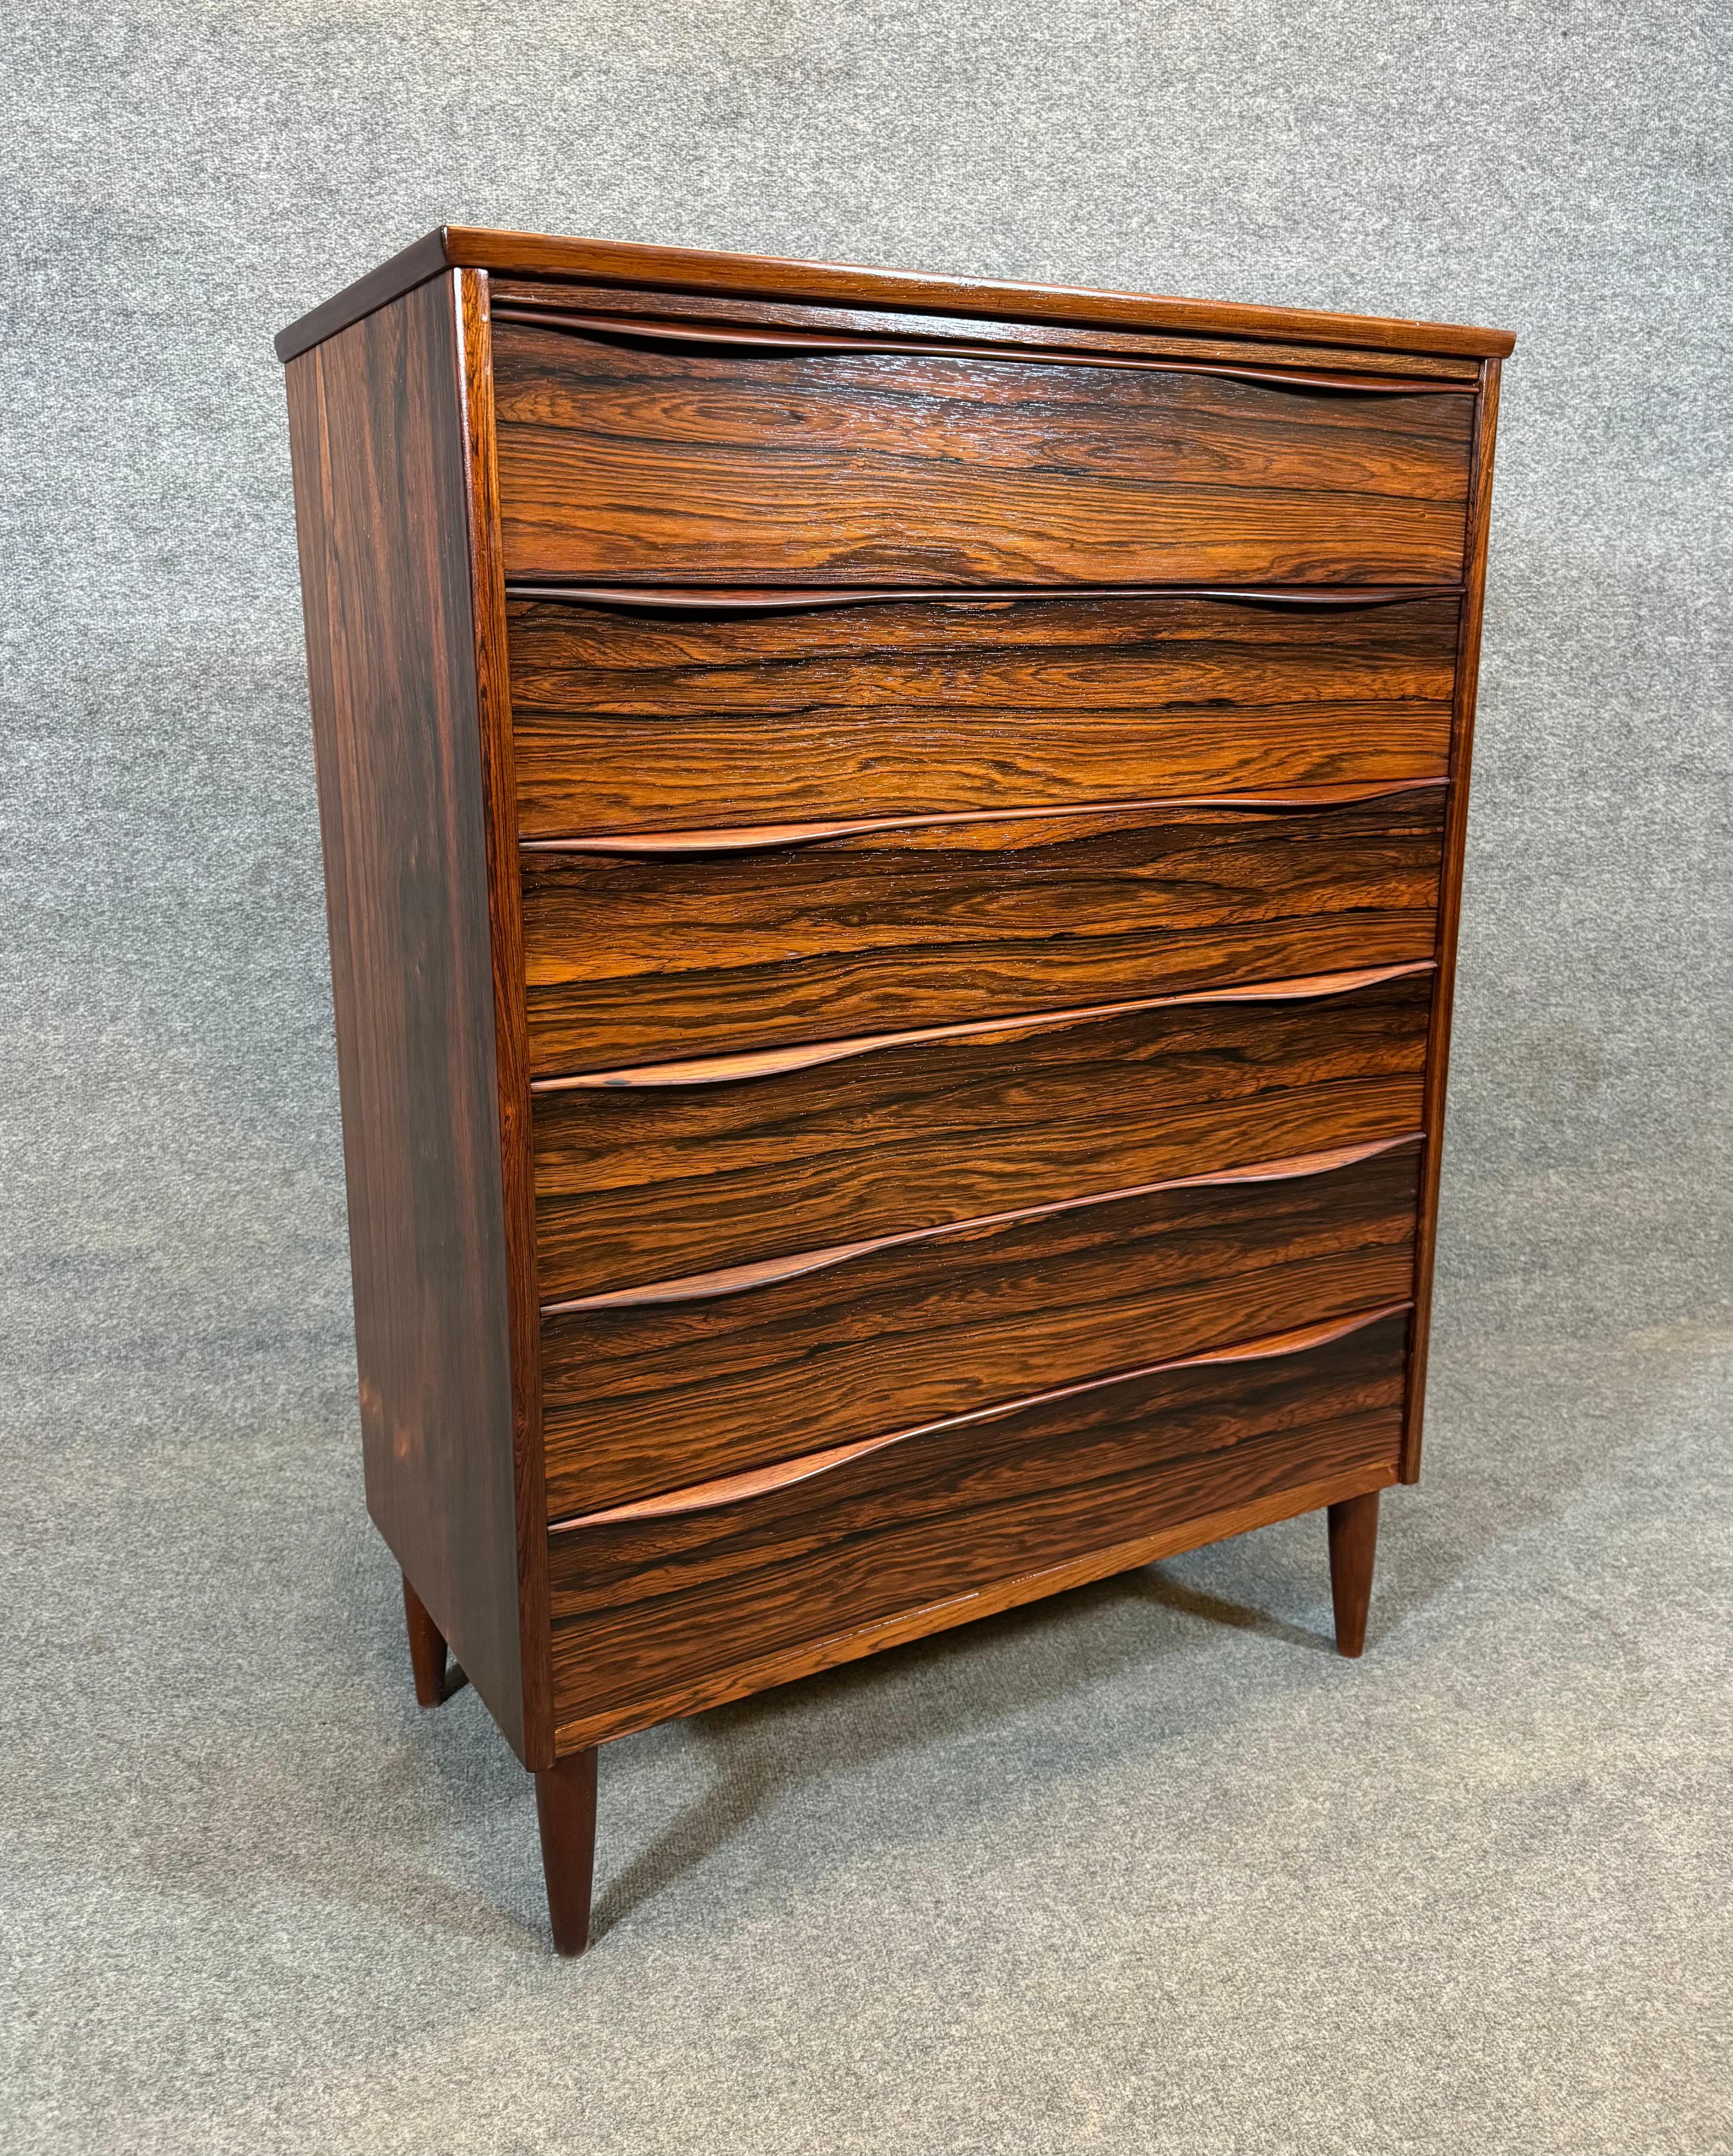 Here is a very special scandinavian modern chest of drawer dresser in rosewood manufactured in Denmark in the 1960's. This beautiful piece, recently imported from Europe to California before its refinishing, features highly figurative wood grain